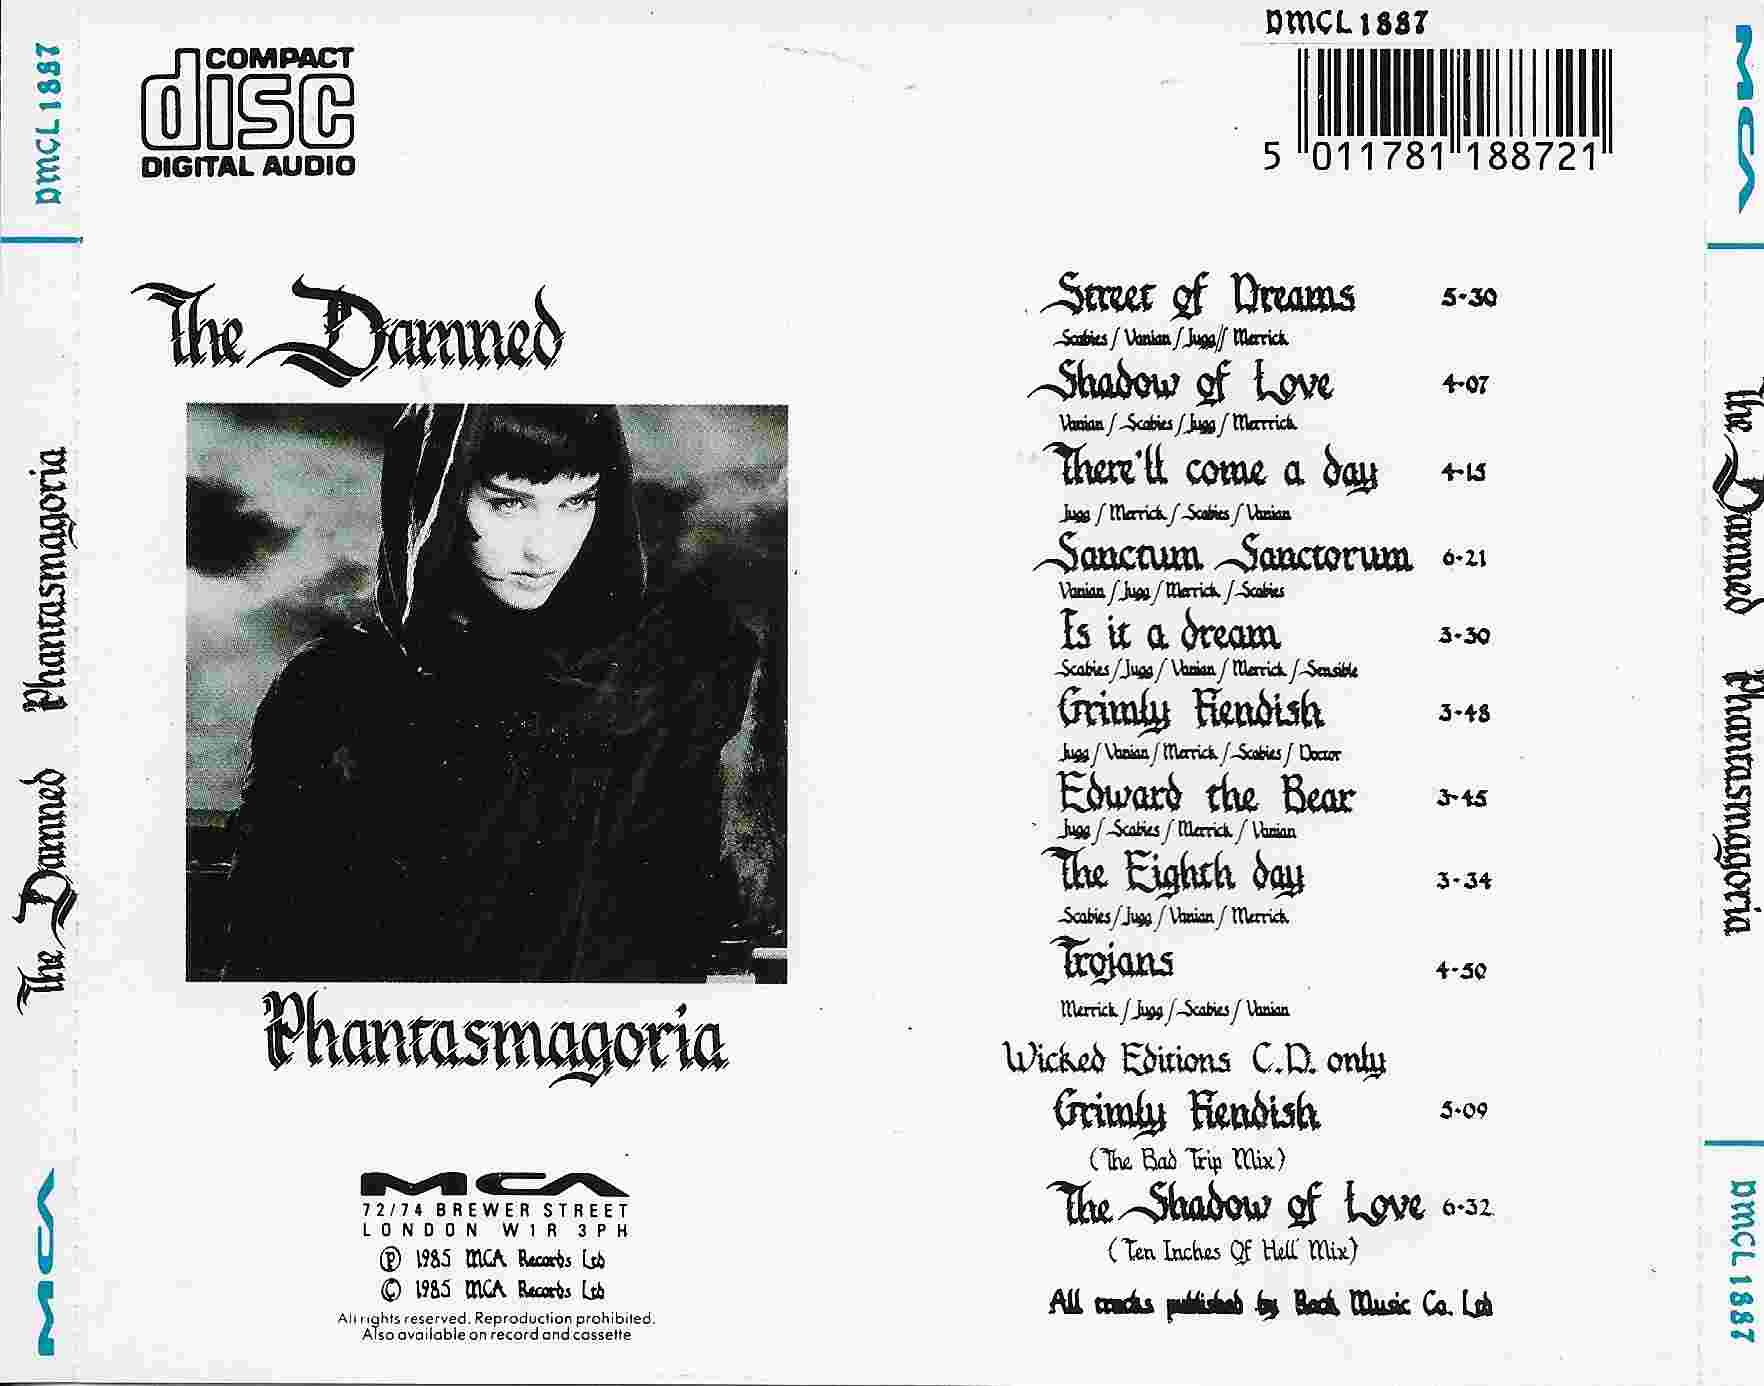 Picture of DMCL 1887 Phantasmagoria by artist The Damned 